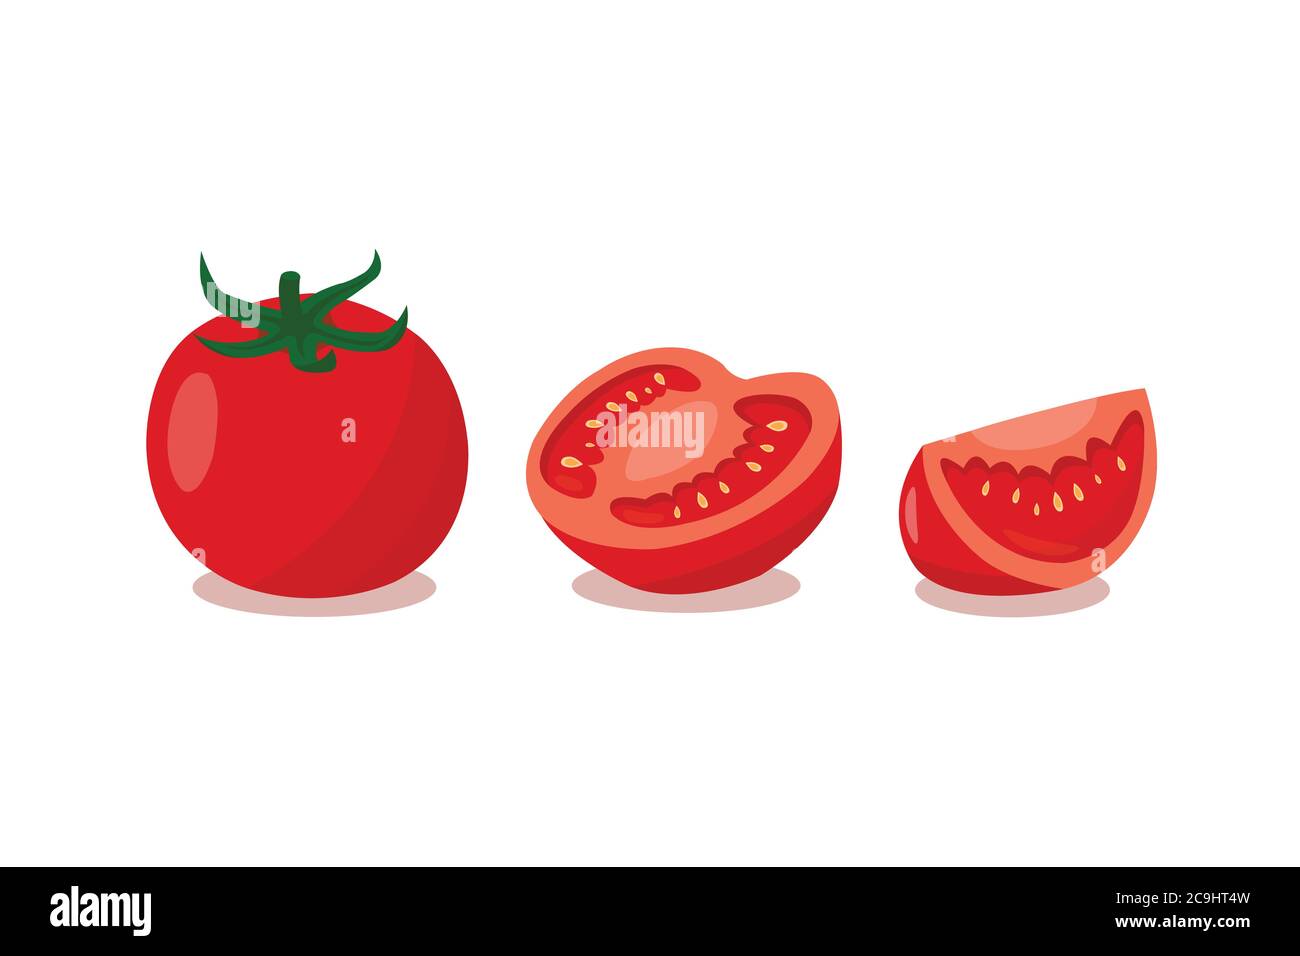 Tomatoes isolated on white background. Tomatoes cut in half on a white background. Stock Vector